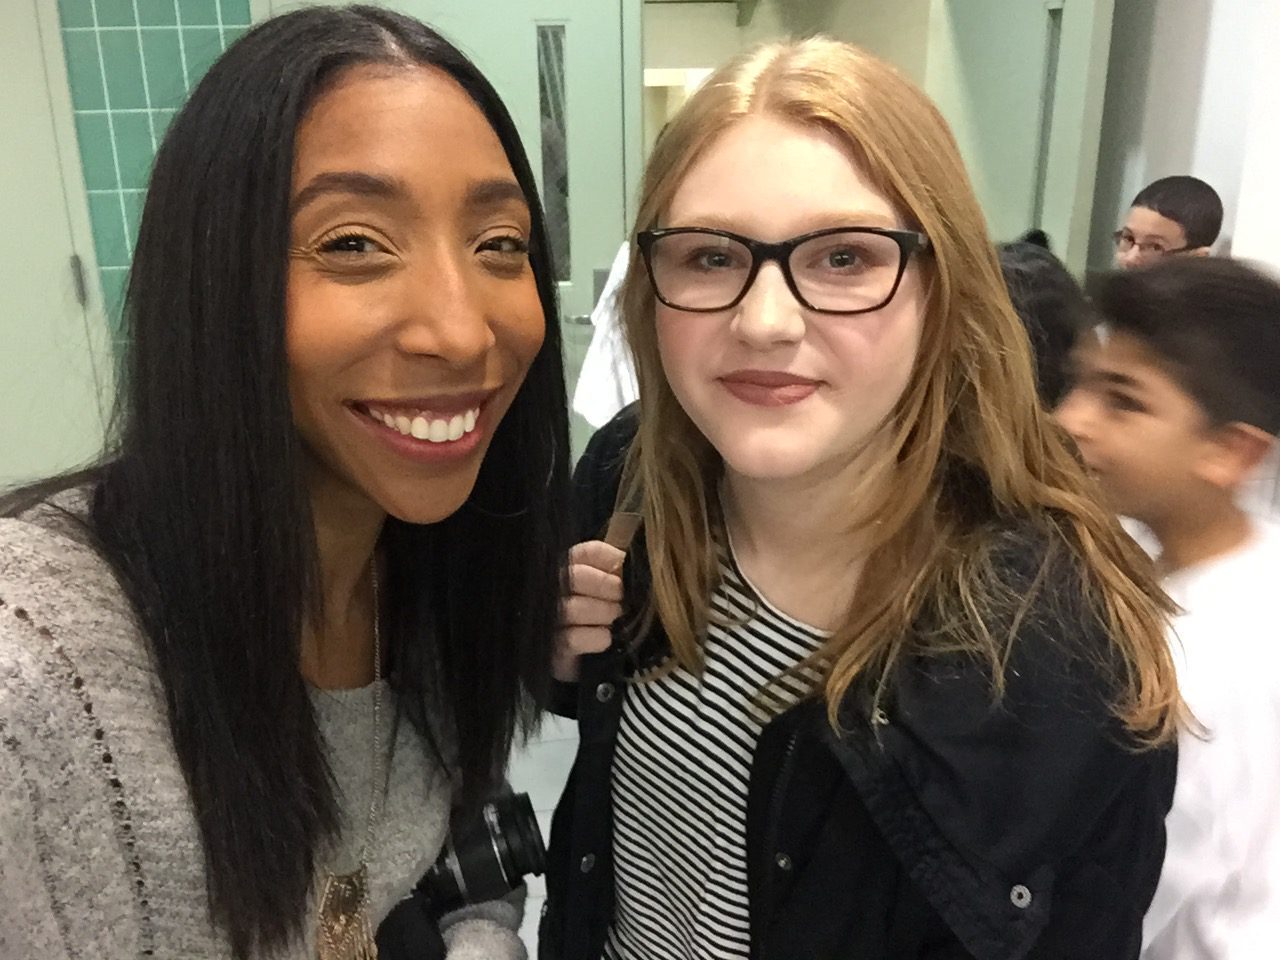 A girl smiles while standing next to another girl in a hallway.